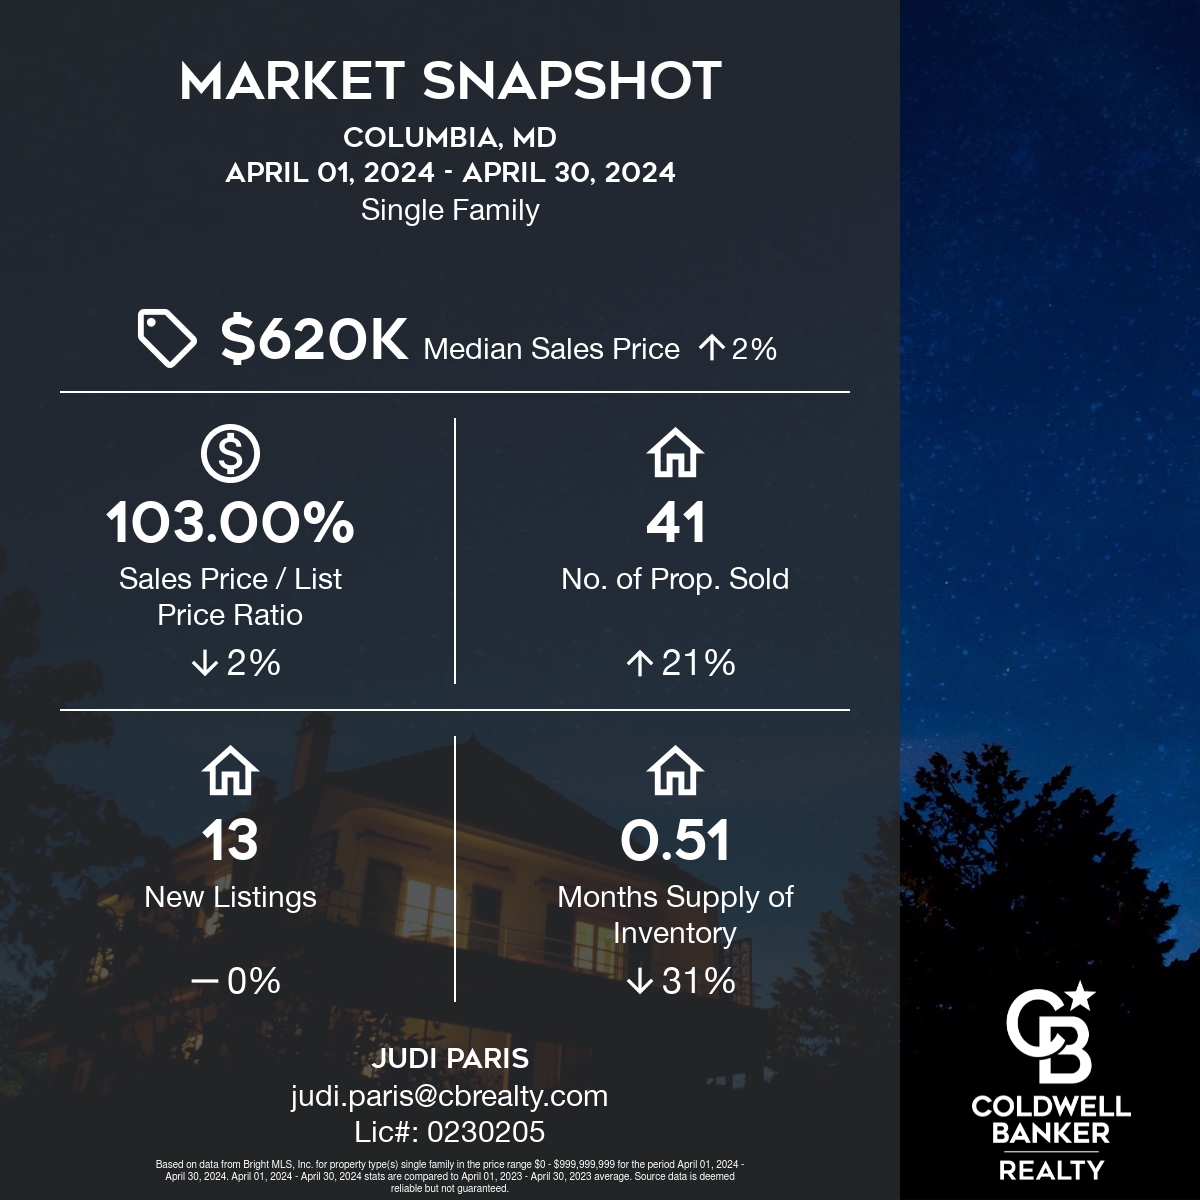 Real Estate Market in Columbia, MD April 2024 compared to April 2023